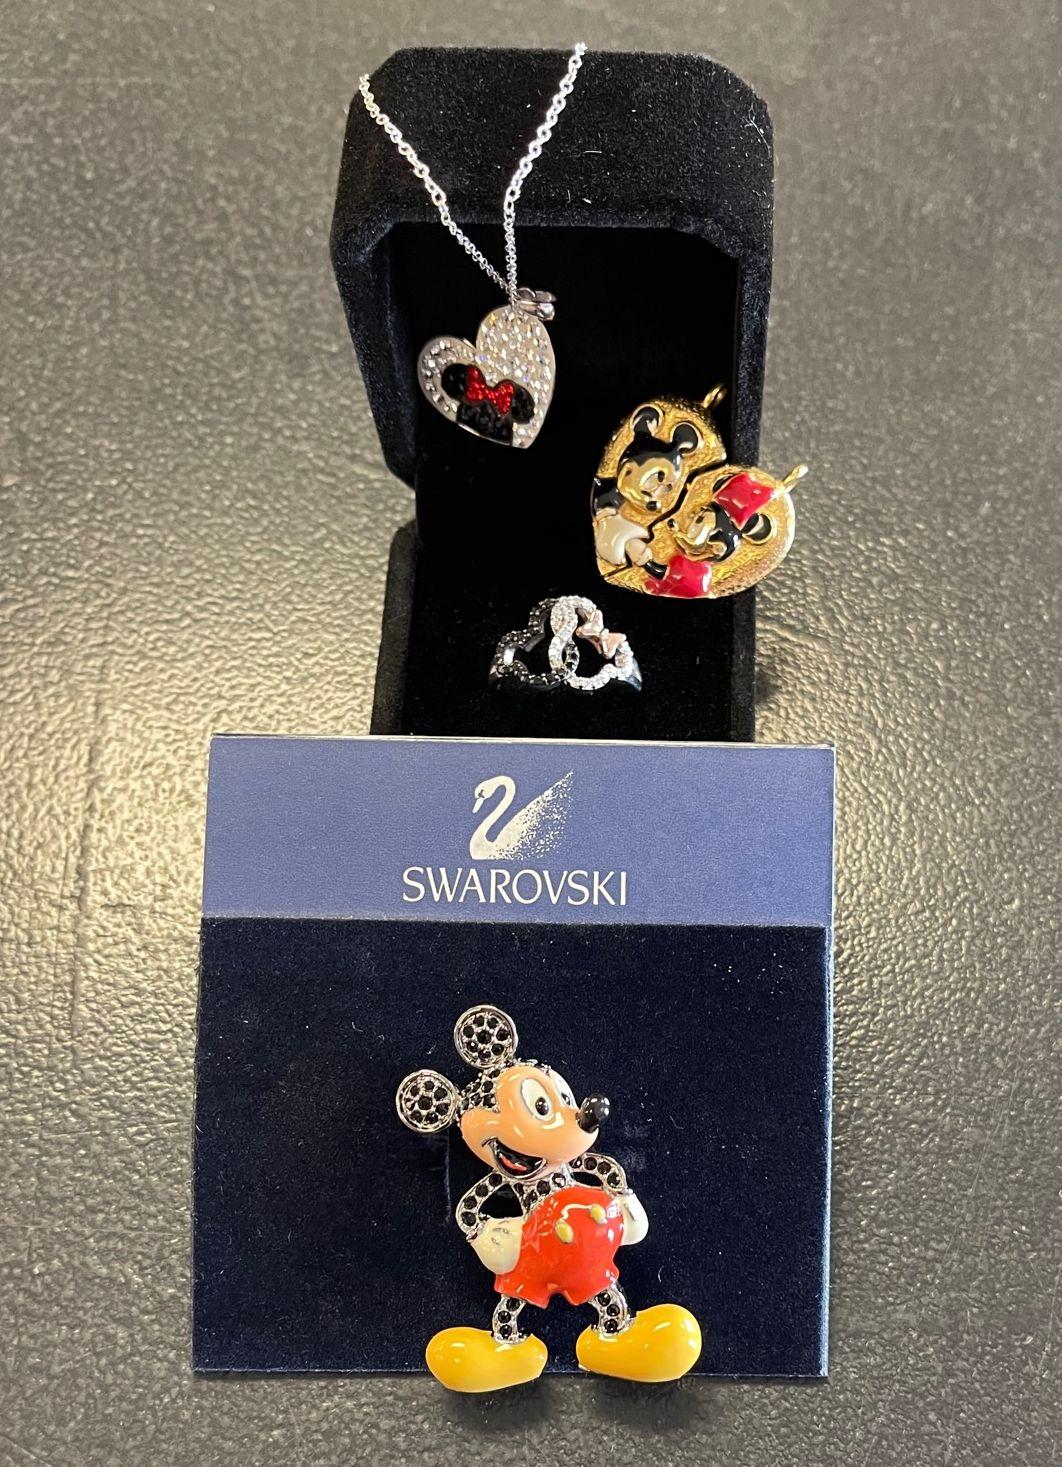 Simply Fabulous! Vintage Walt Disney Mickey & Minnie Mouse Necklace, Ring, Pendant,  Brooch and Bag Grouping. Includes: 
*Vintage Disney Mickey and Minnie Mouse Best Friends Heart Pendant Necklace Simply Delightful! Authentic Rare Retired Signed